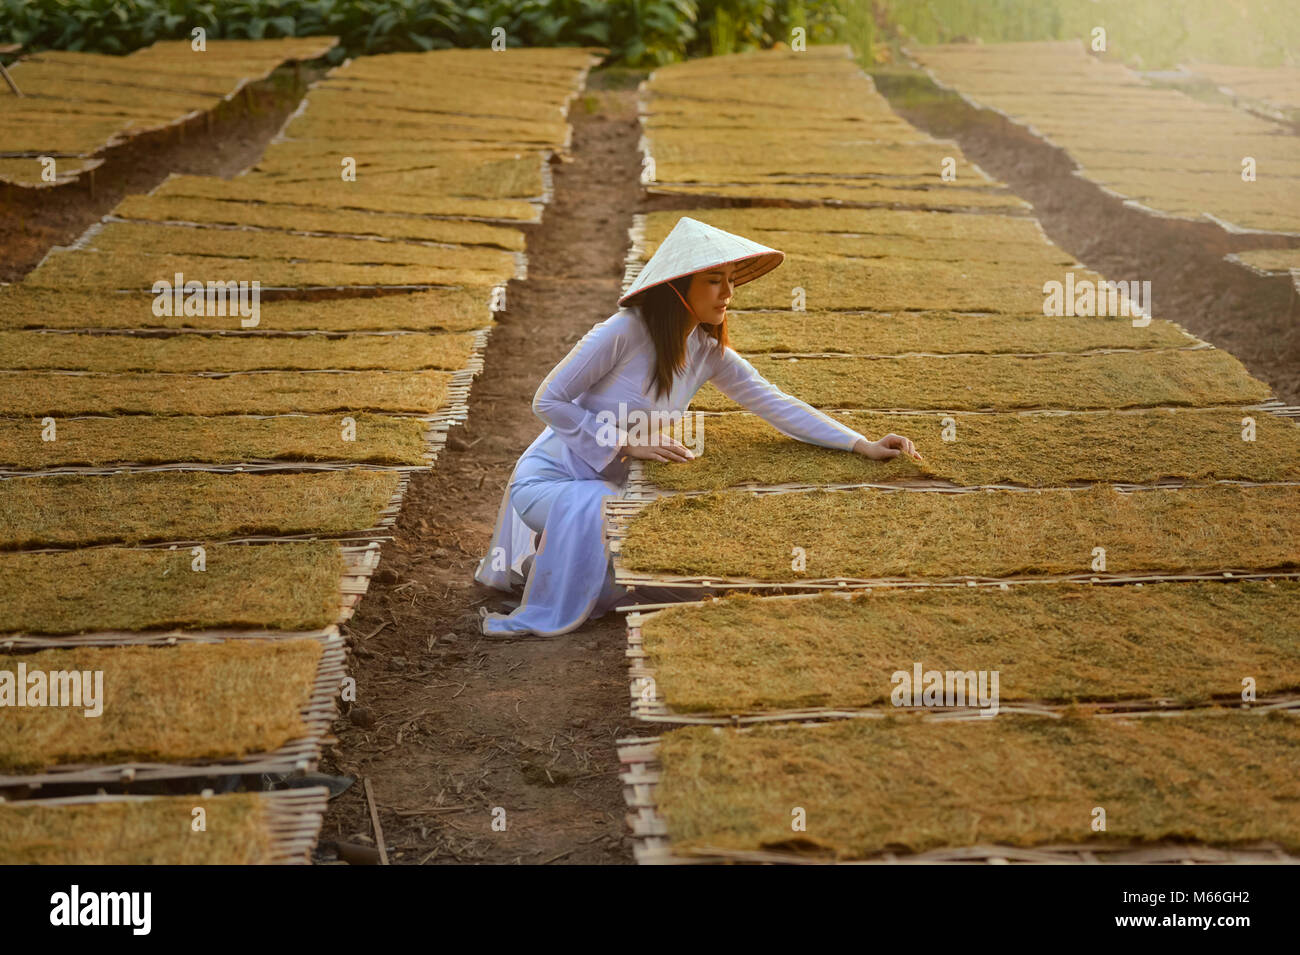 Woman drying tobacco in a field, Vietnam Stock Photo